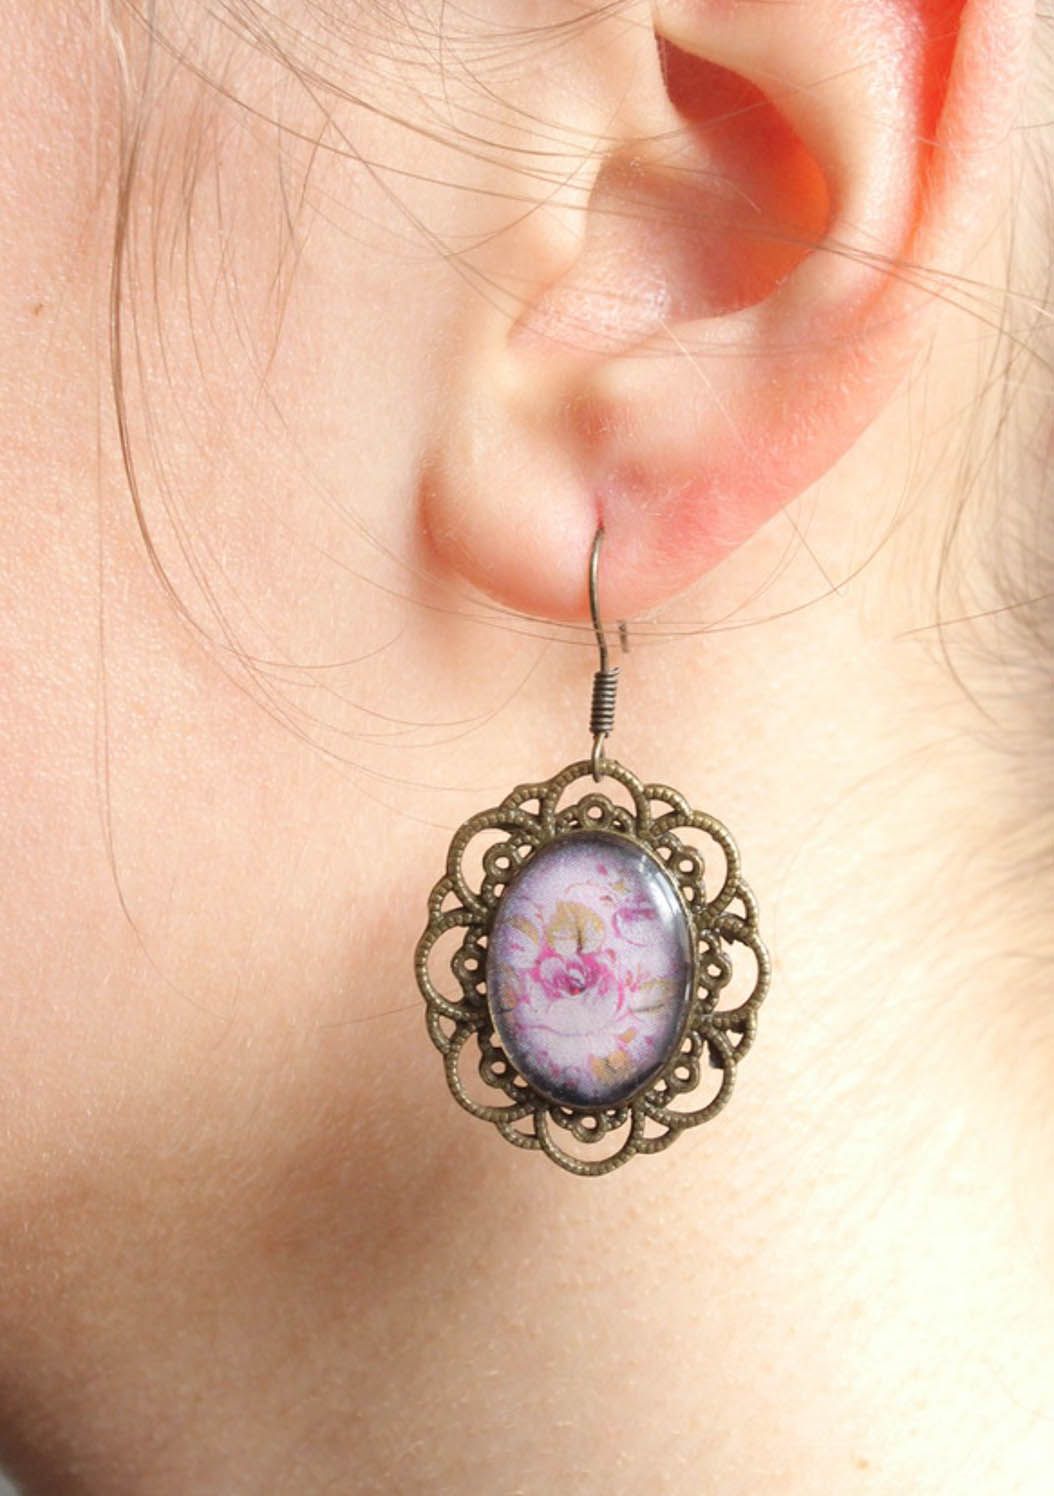 Vintage earrings with flowers photo 1